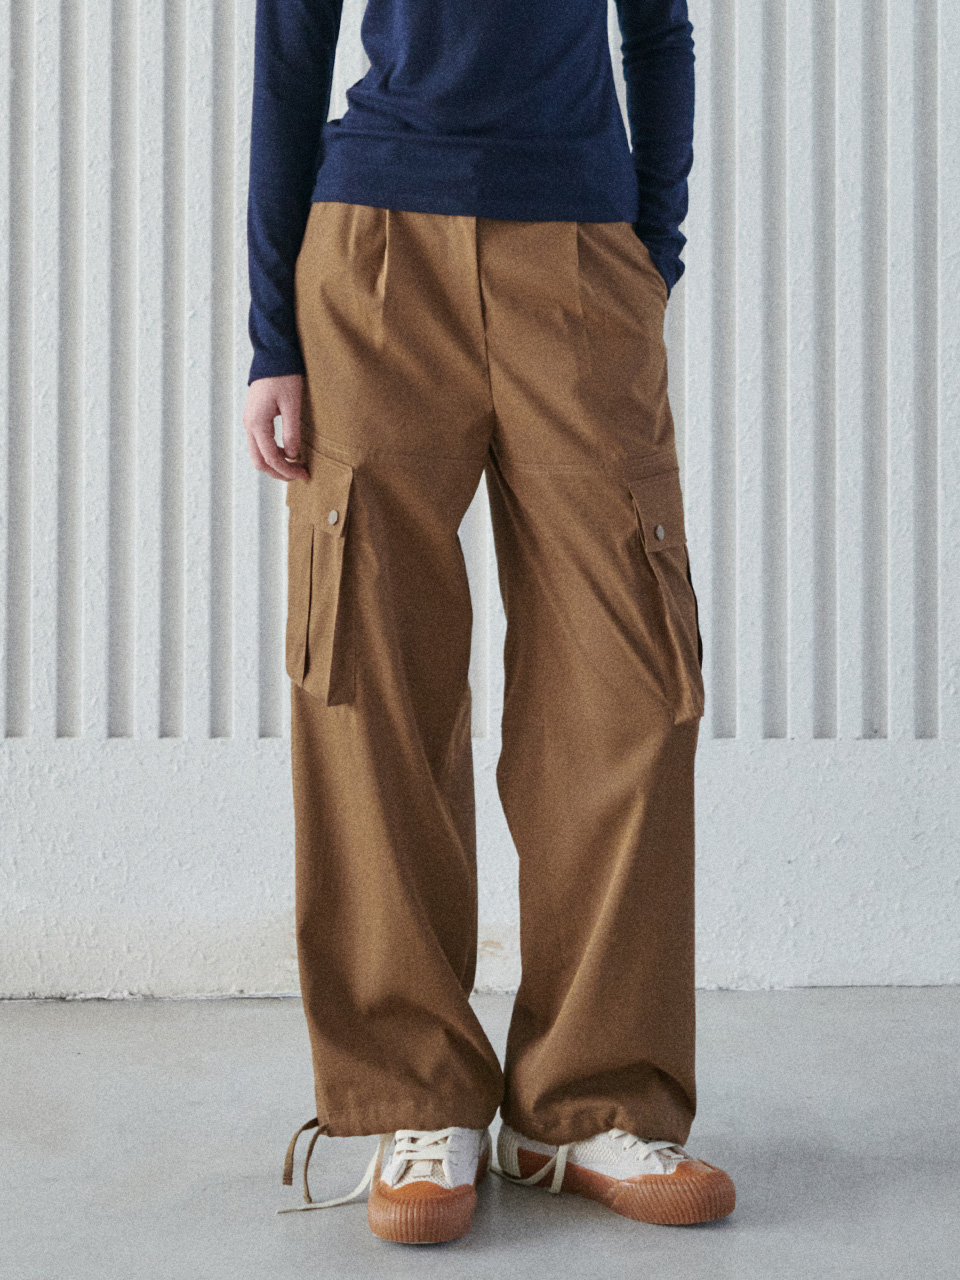 HACIE - CARGO PANTS WITH BINDING DETAIL [3COLORS]